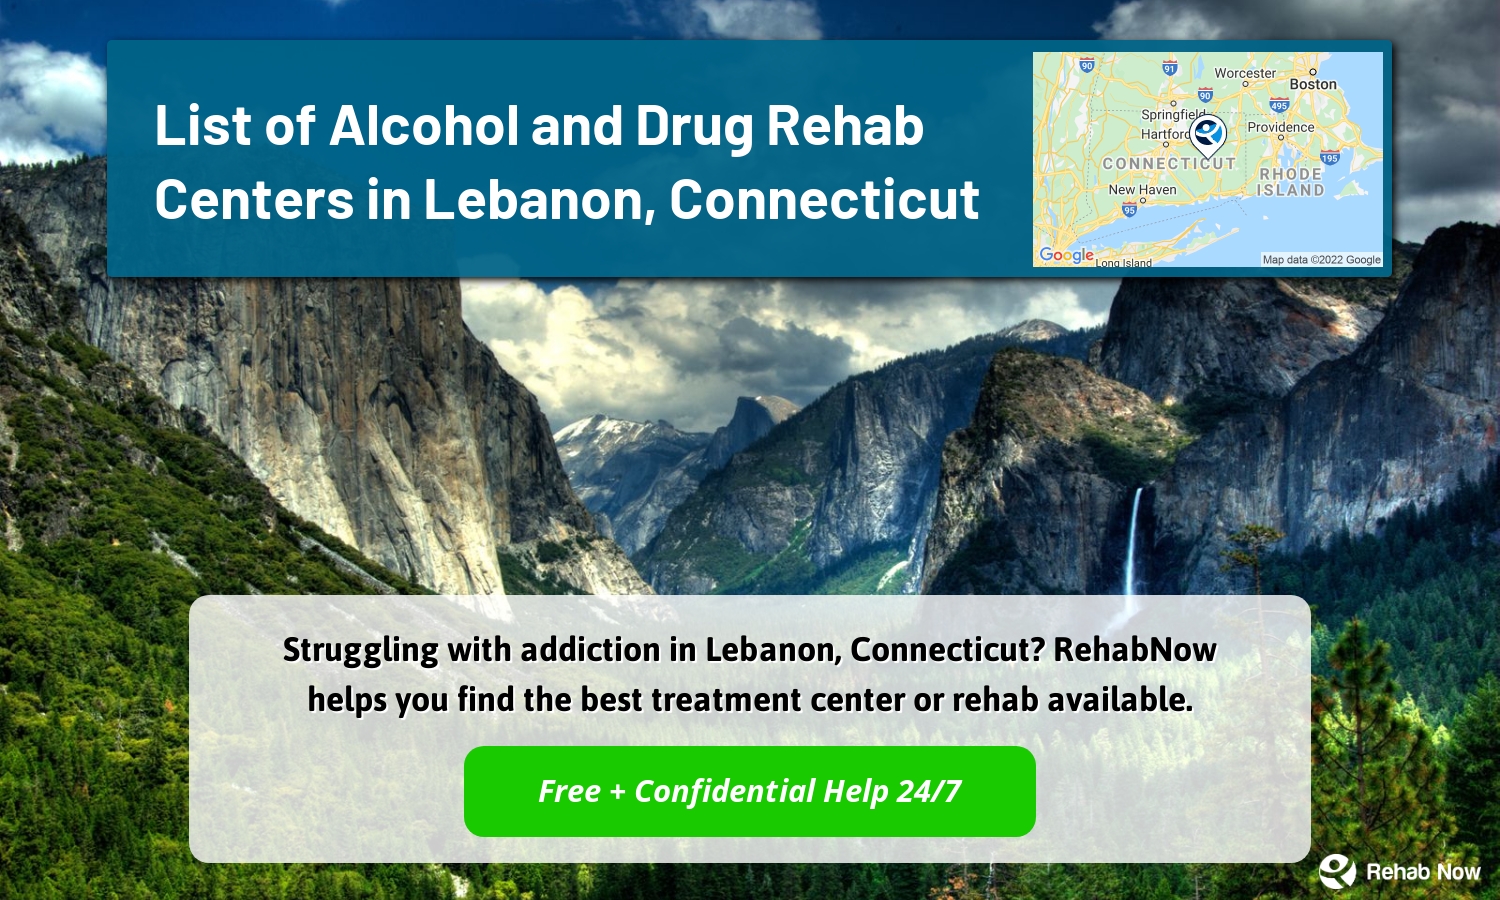 Struggling with addiction in Lebanon, Connecticut? RehabNow helps you find the best treatment center or rehab available.